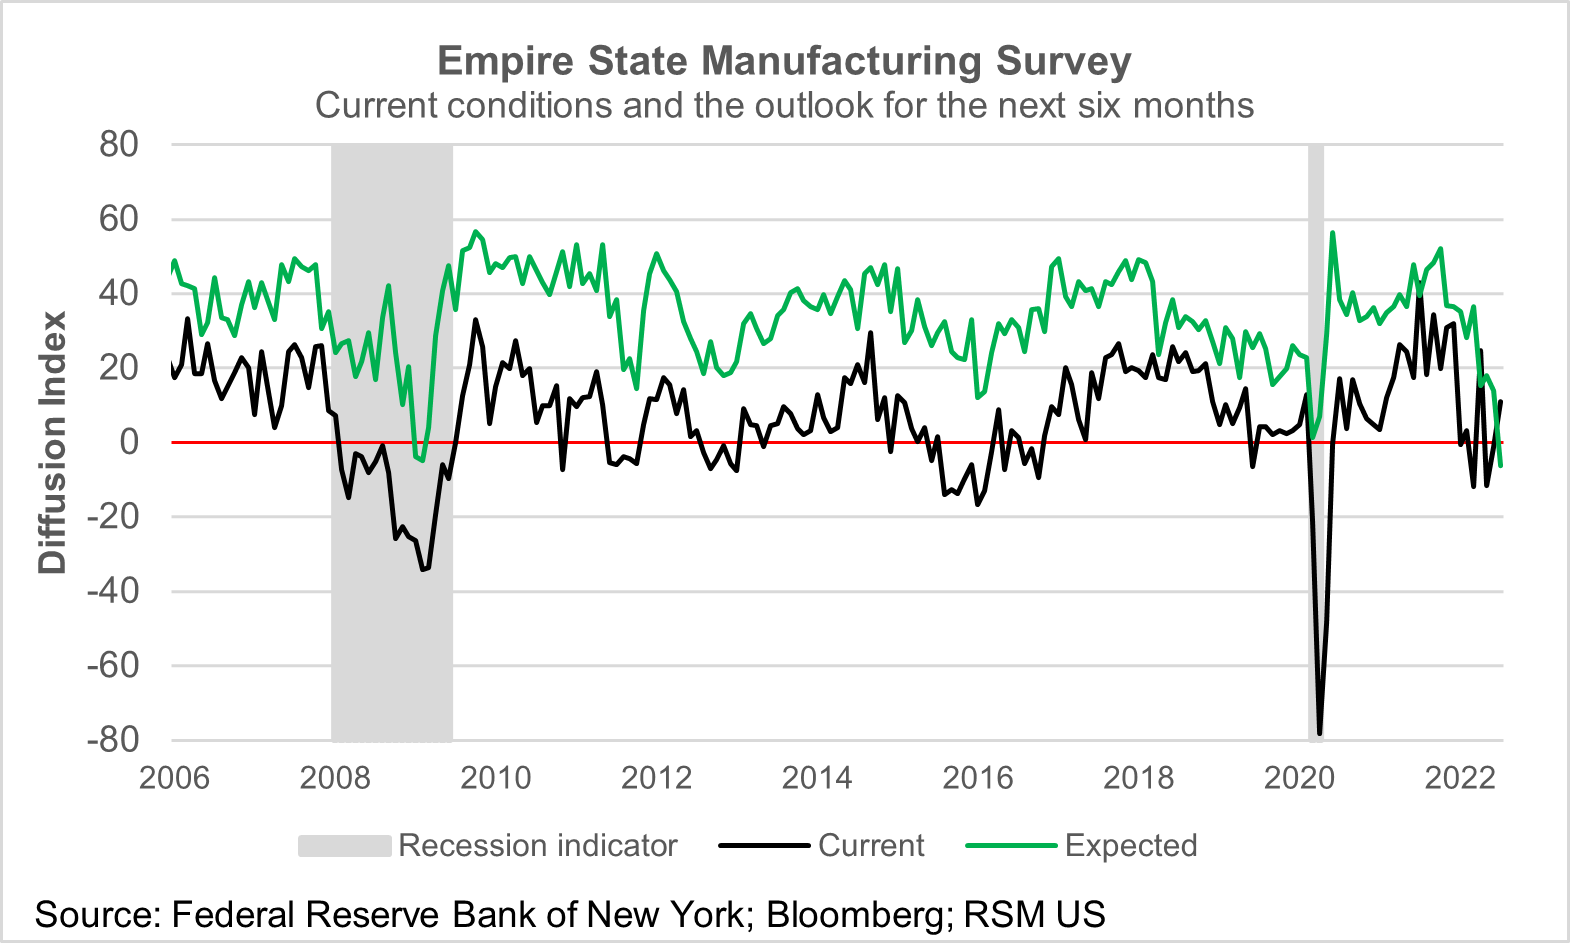 A chart shows current conditions and the outlook of manufacturing activity in New York State